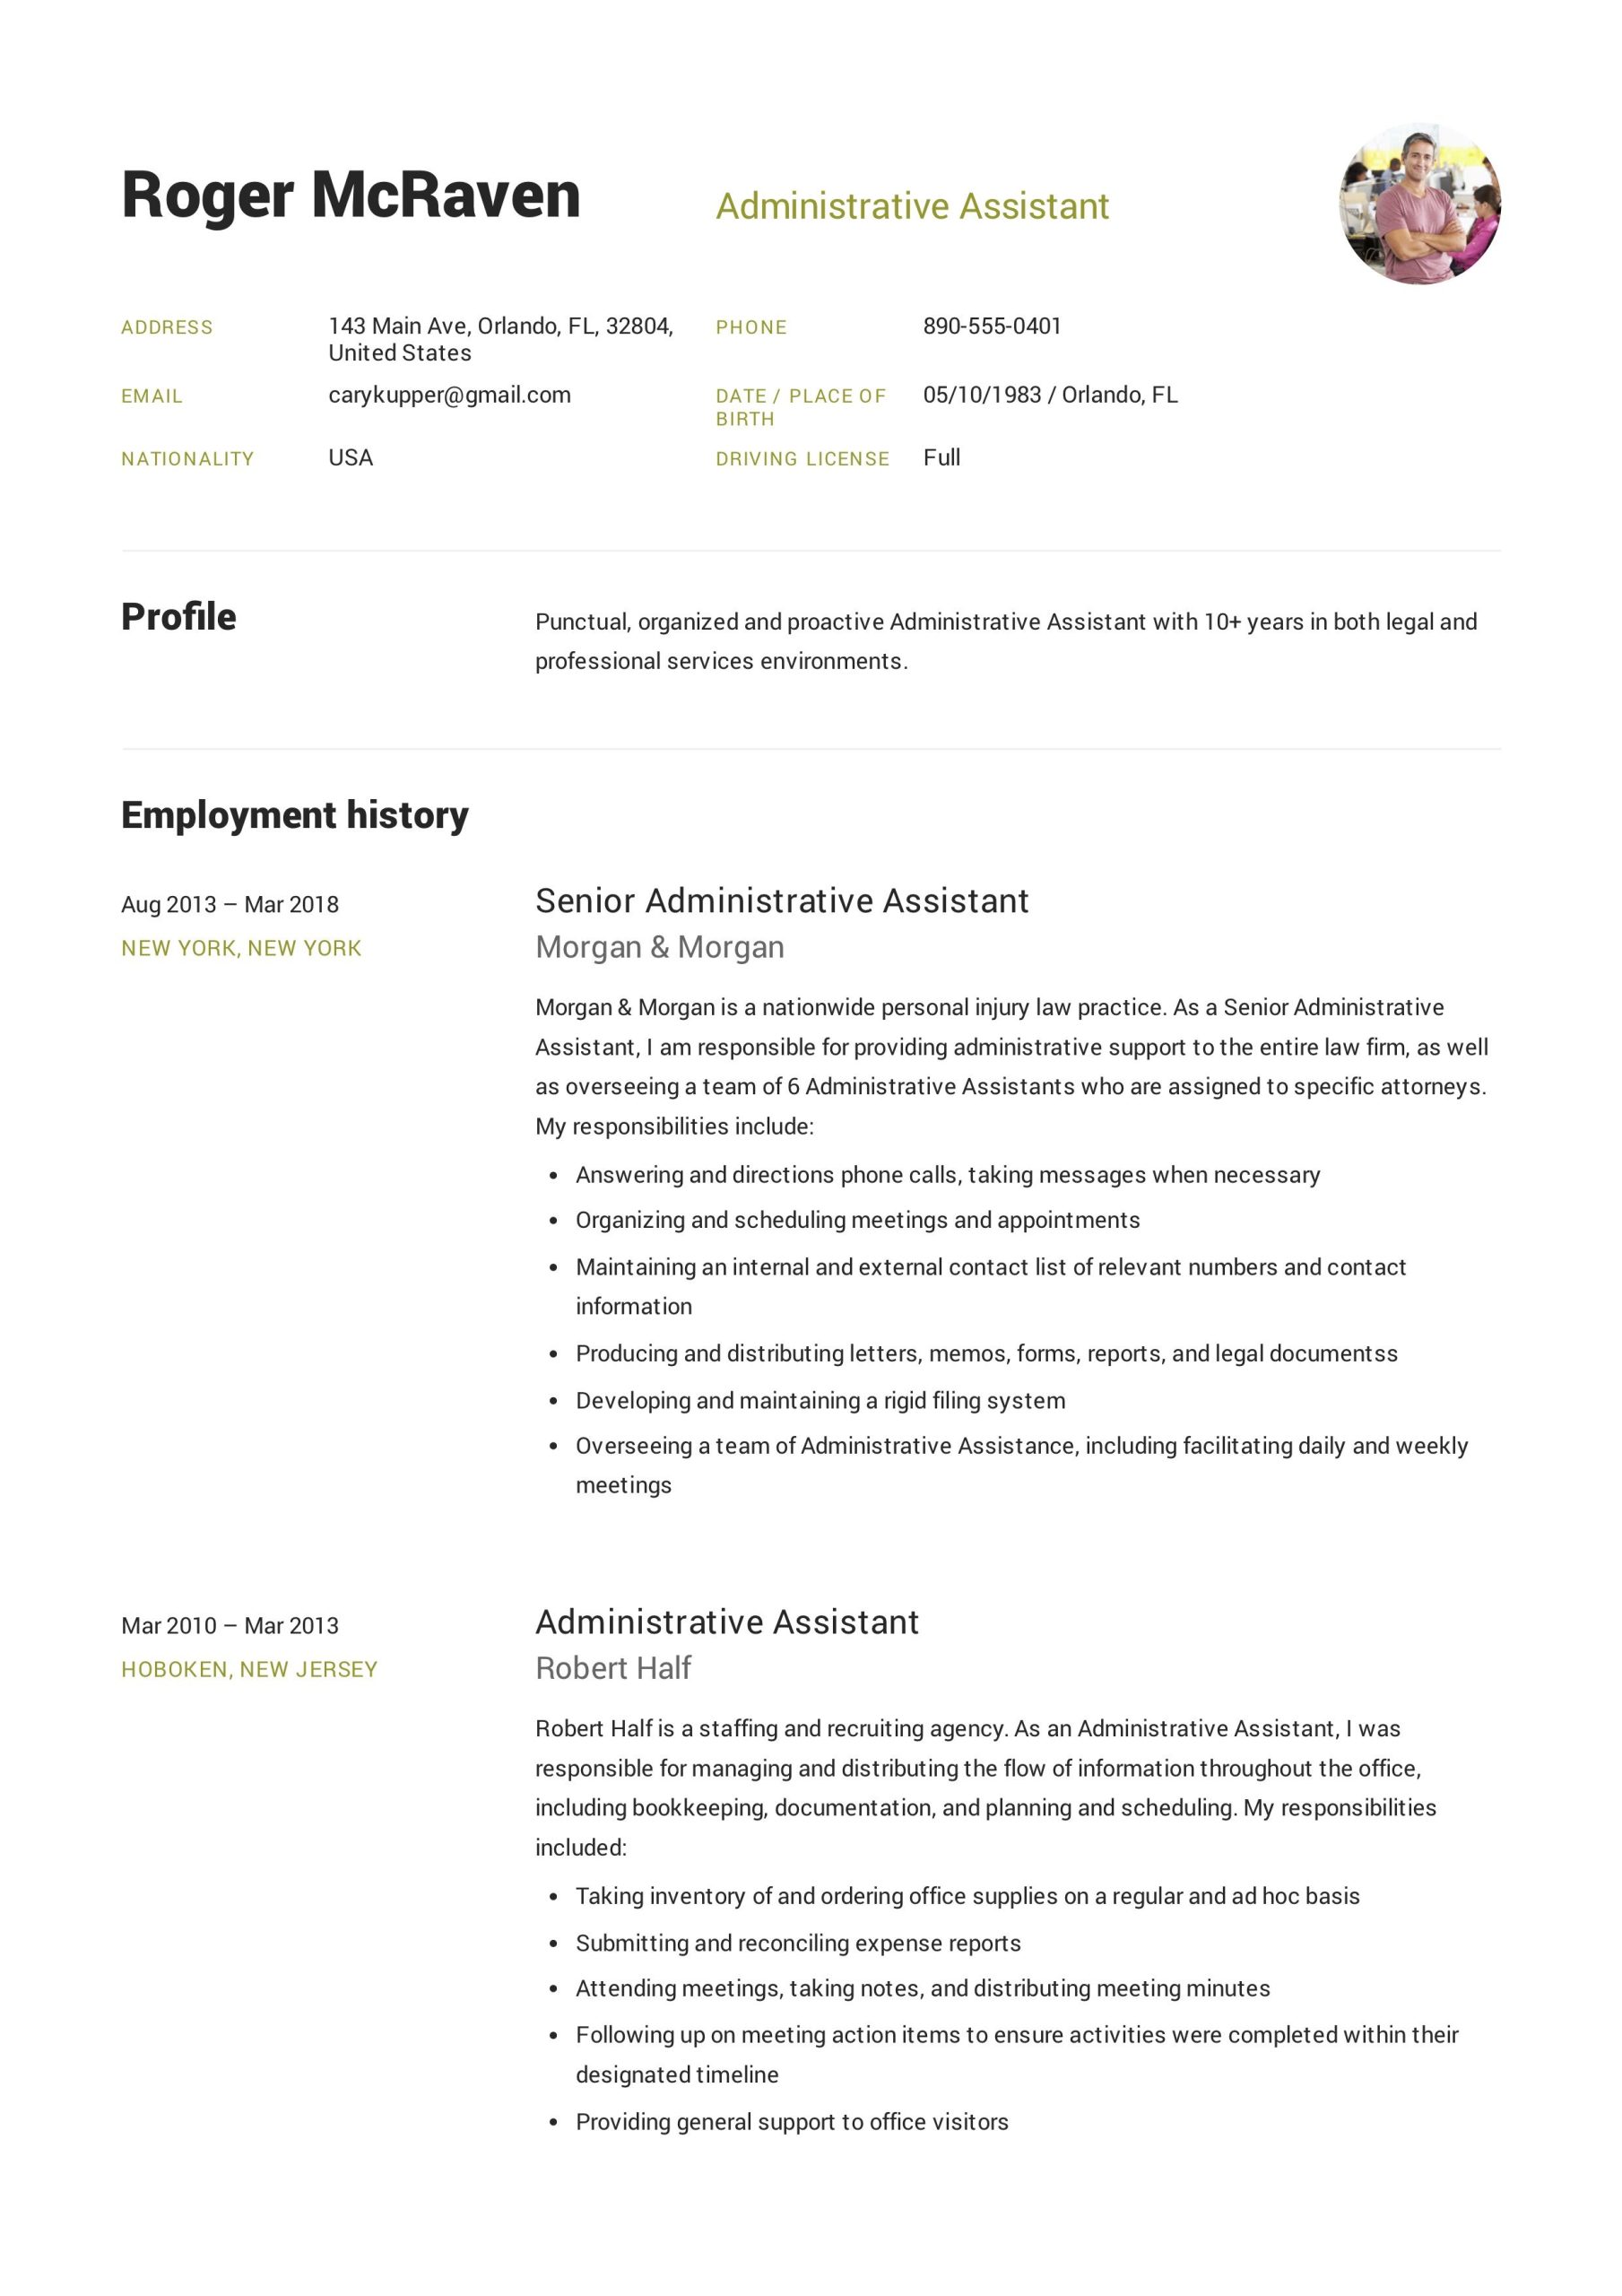 Administrative Assistant Resume 2018